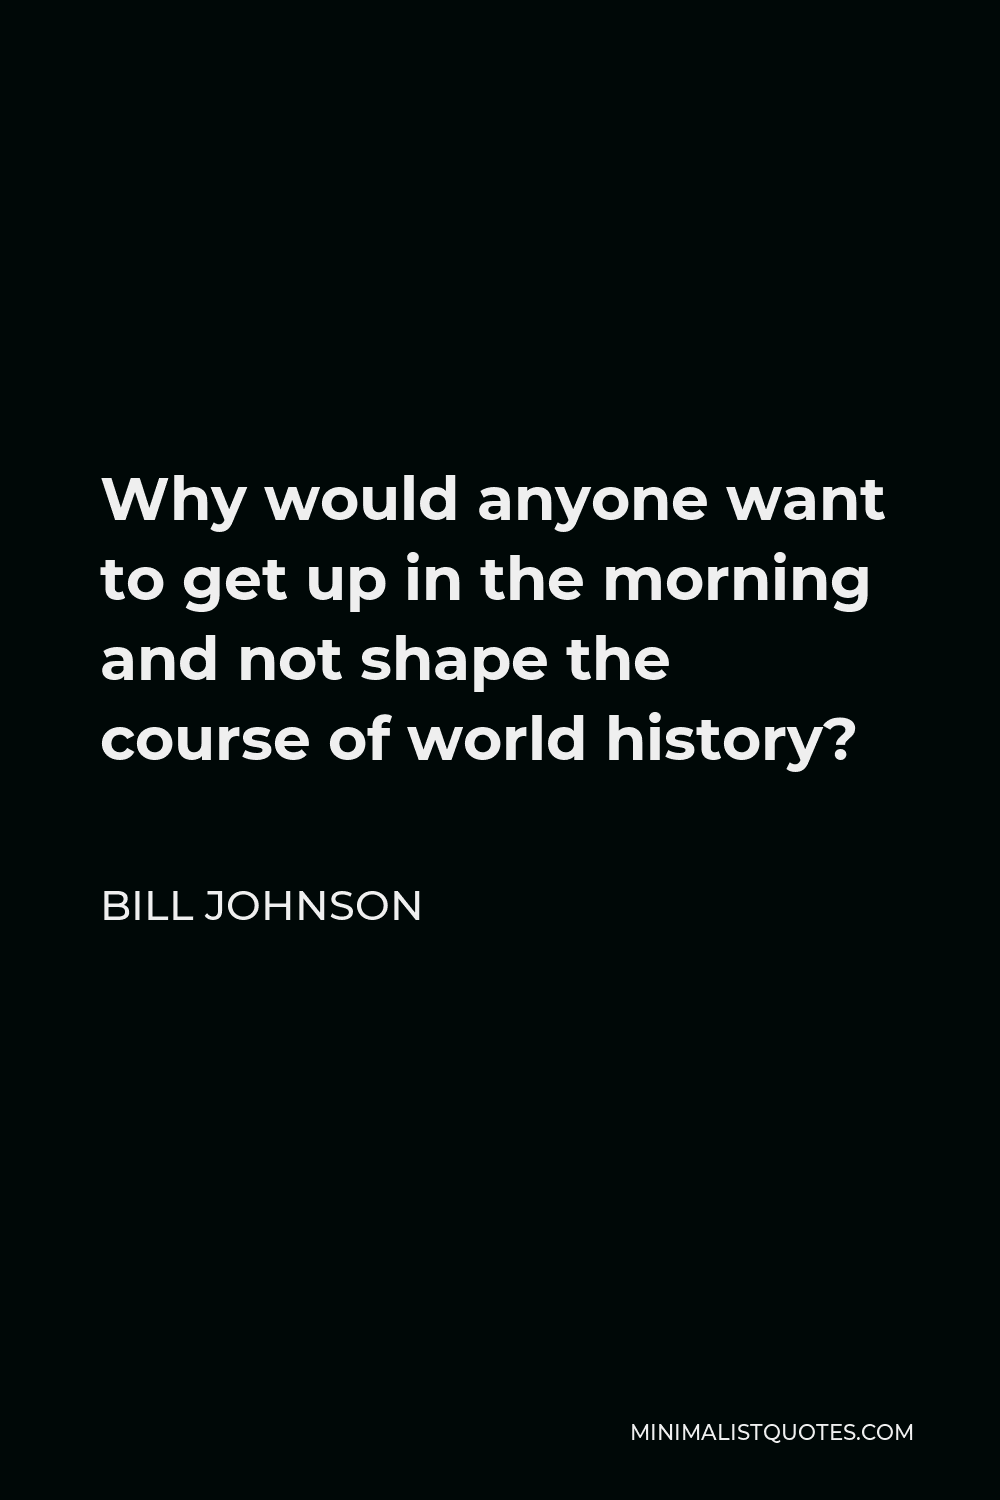 Bill Johnson Quote - Why would anyone want to get up in the morning and not shape the course of world history?